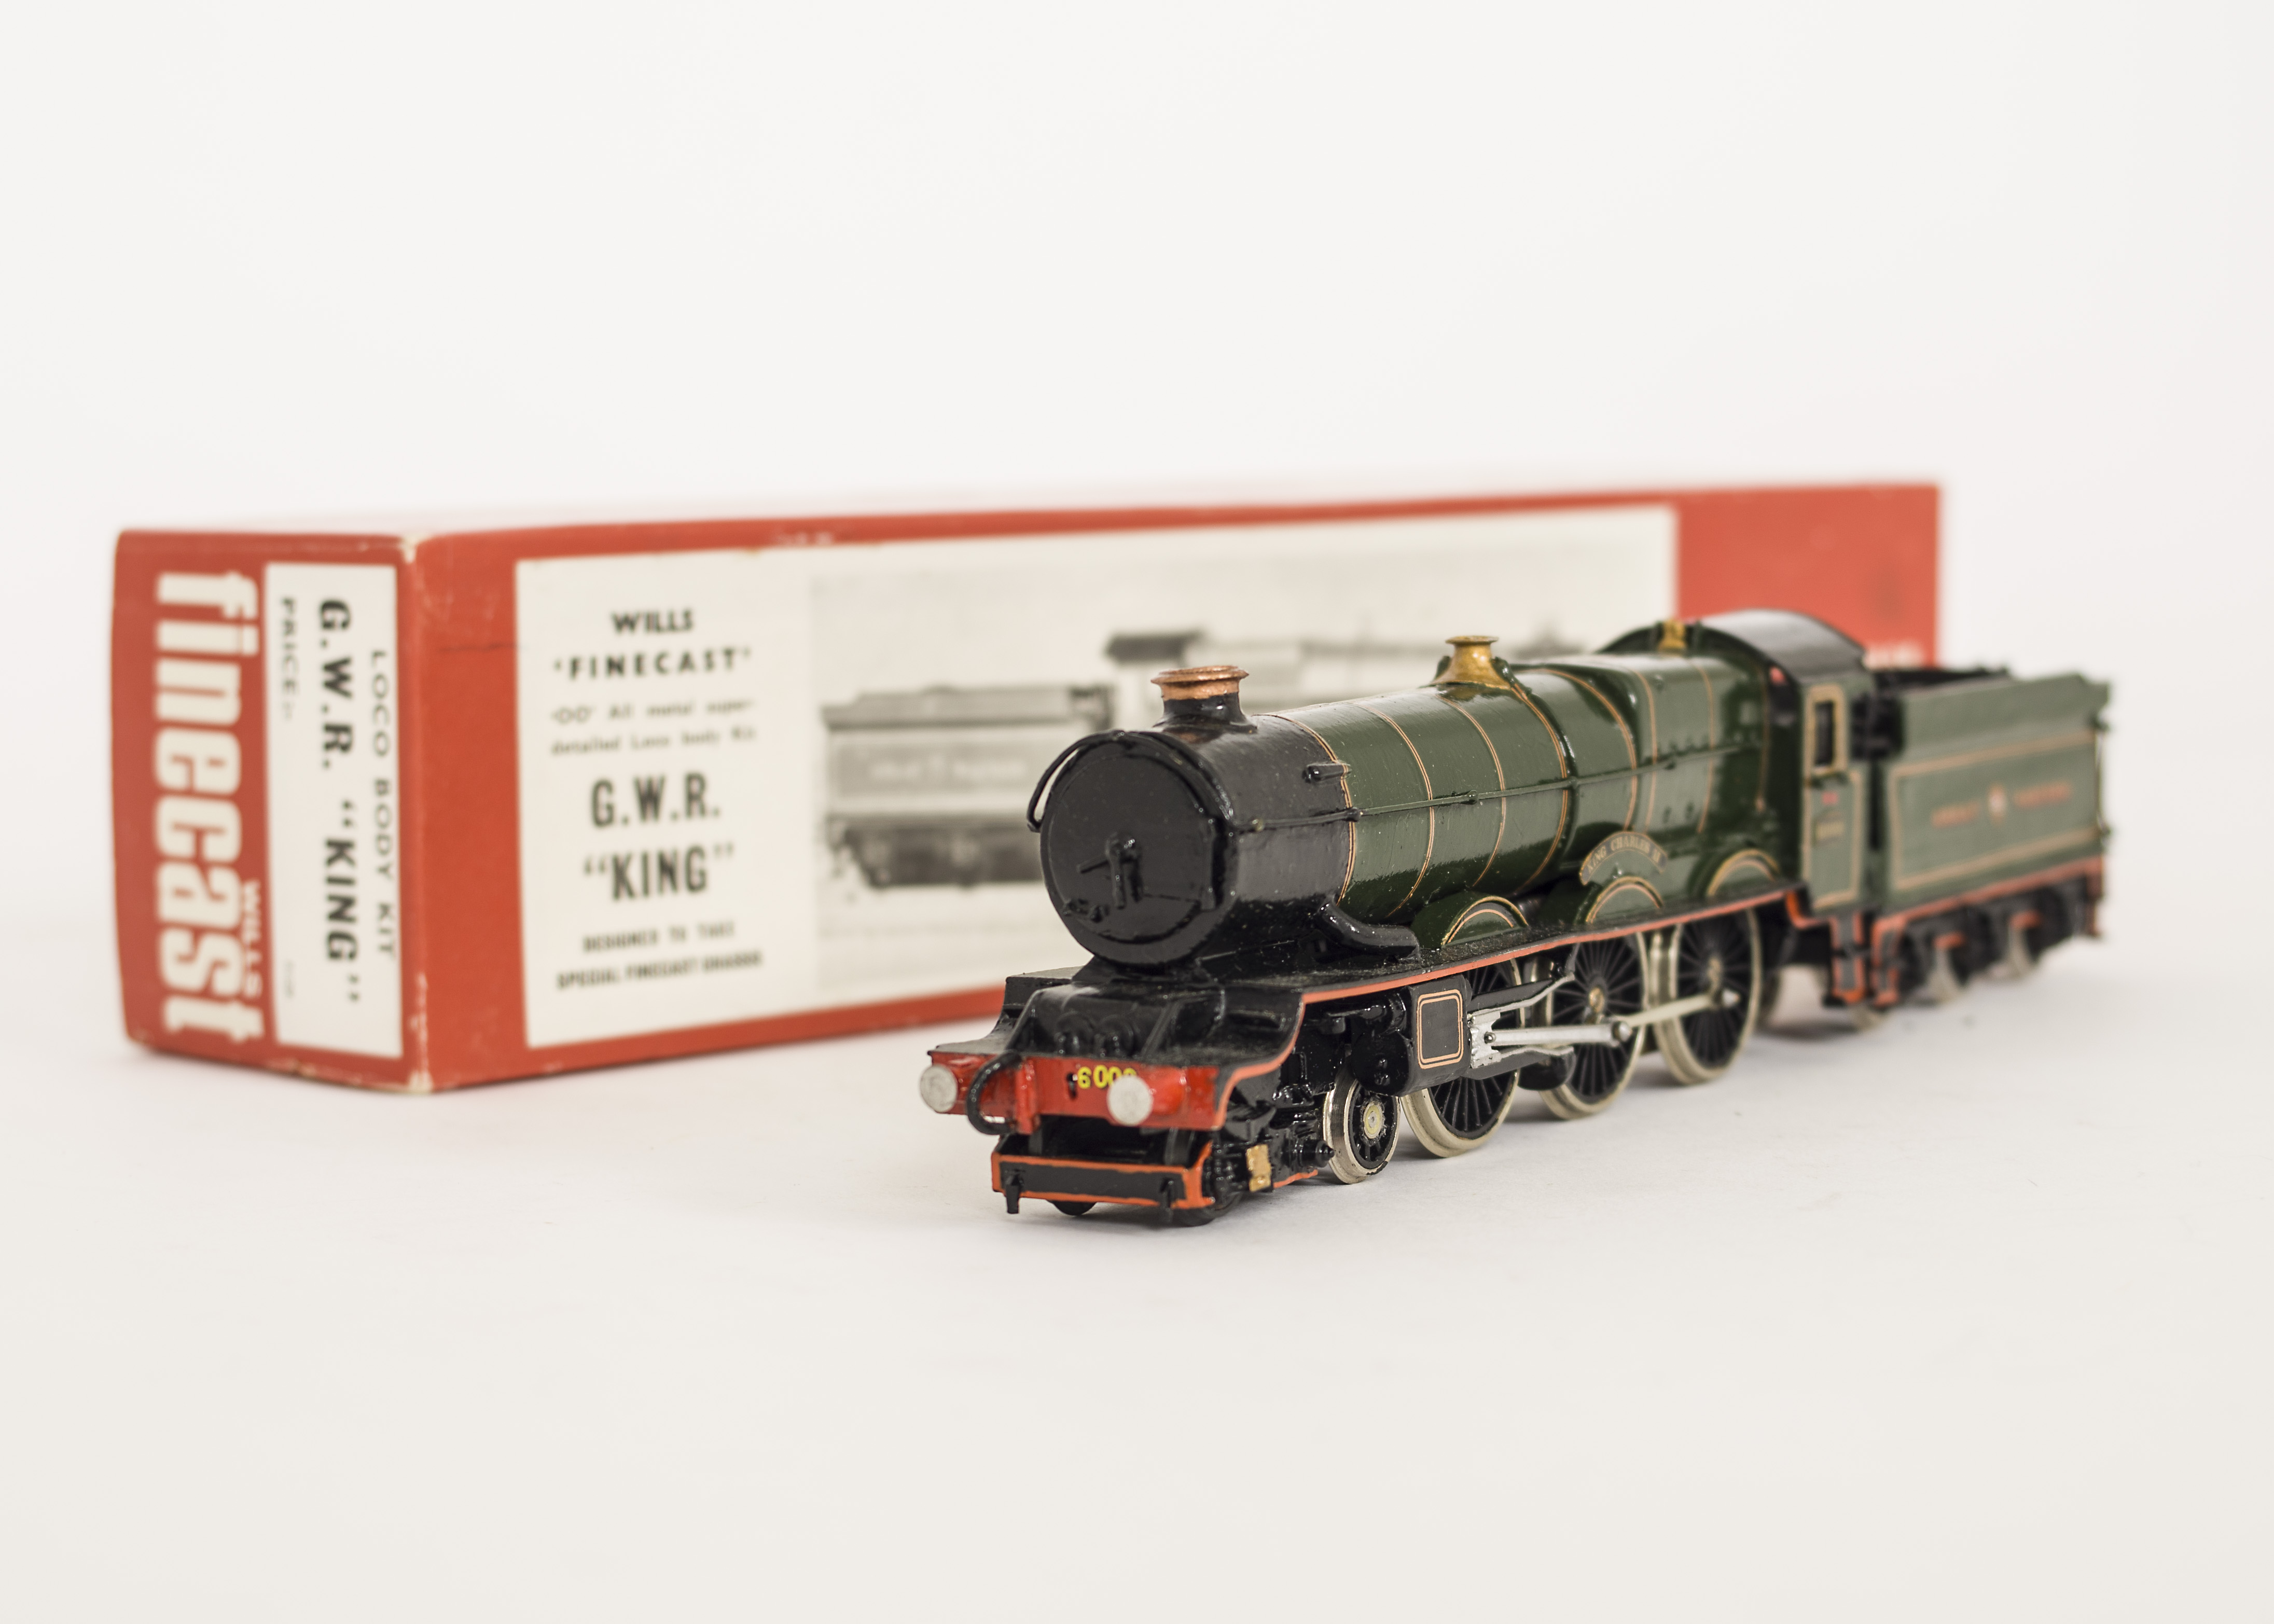 A South Eastern Finecast 00 Gauge Kitbuilt GWR 'King' Class Locomotive and Tender, GWR green 6009 '